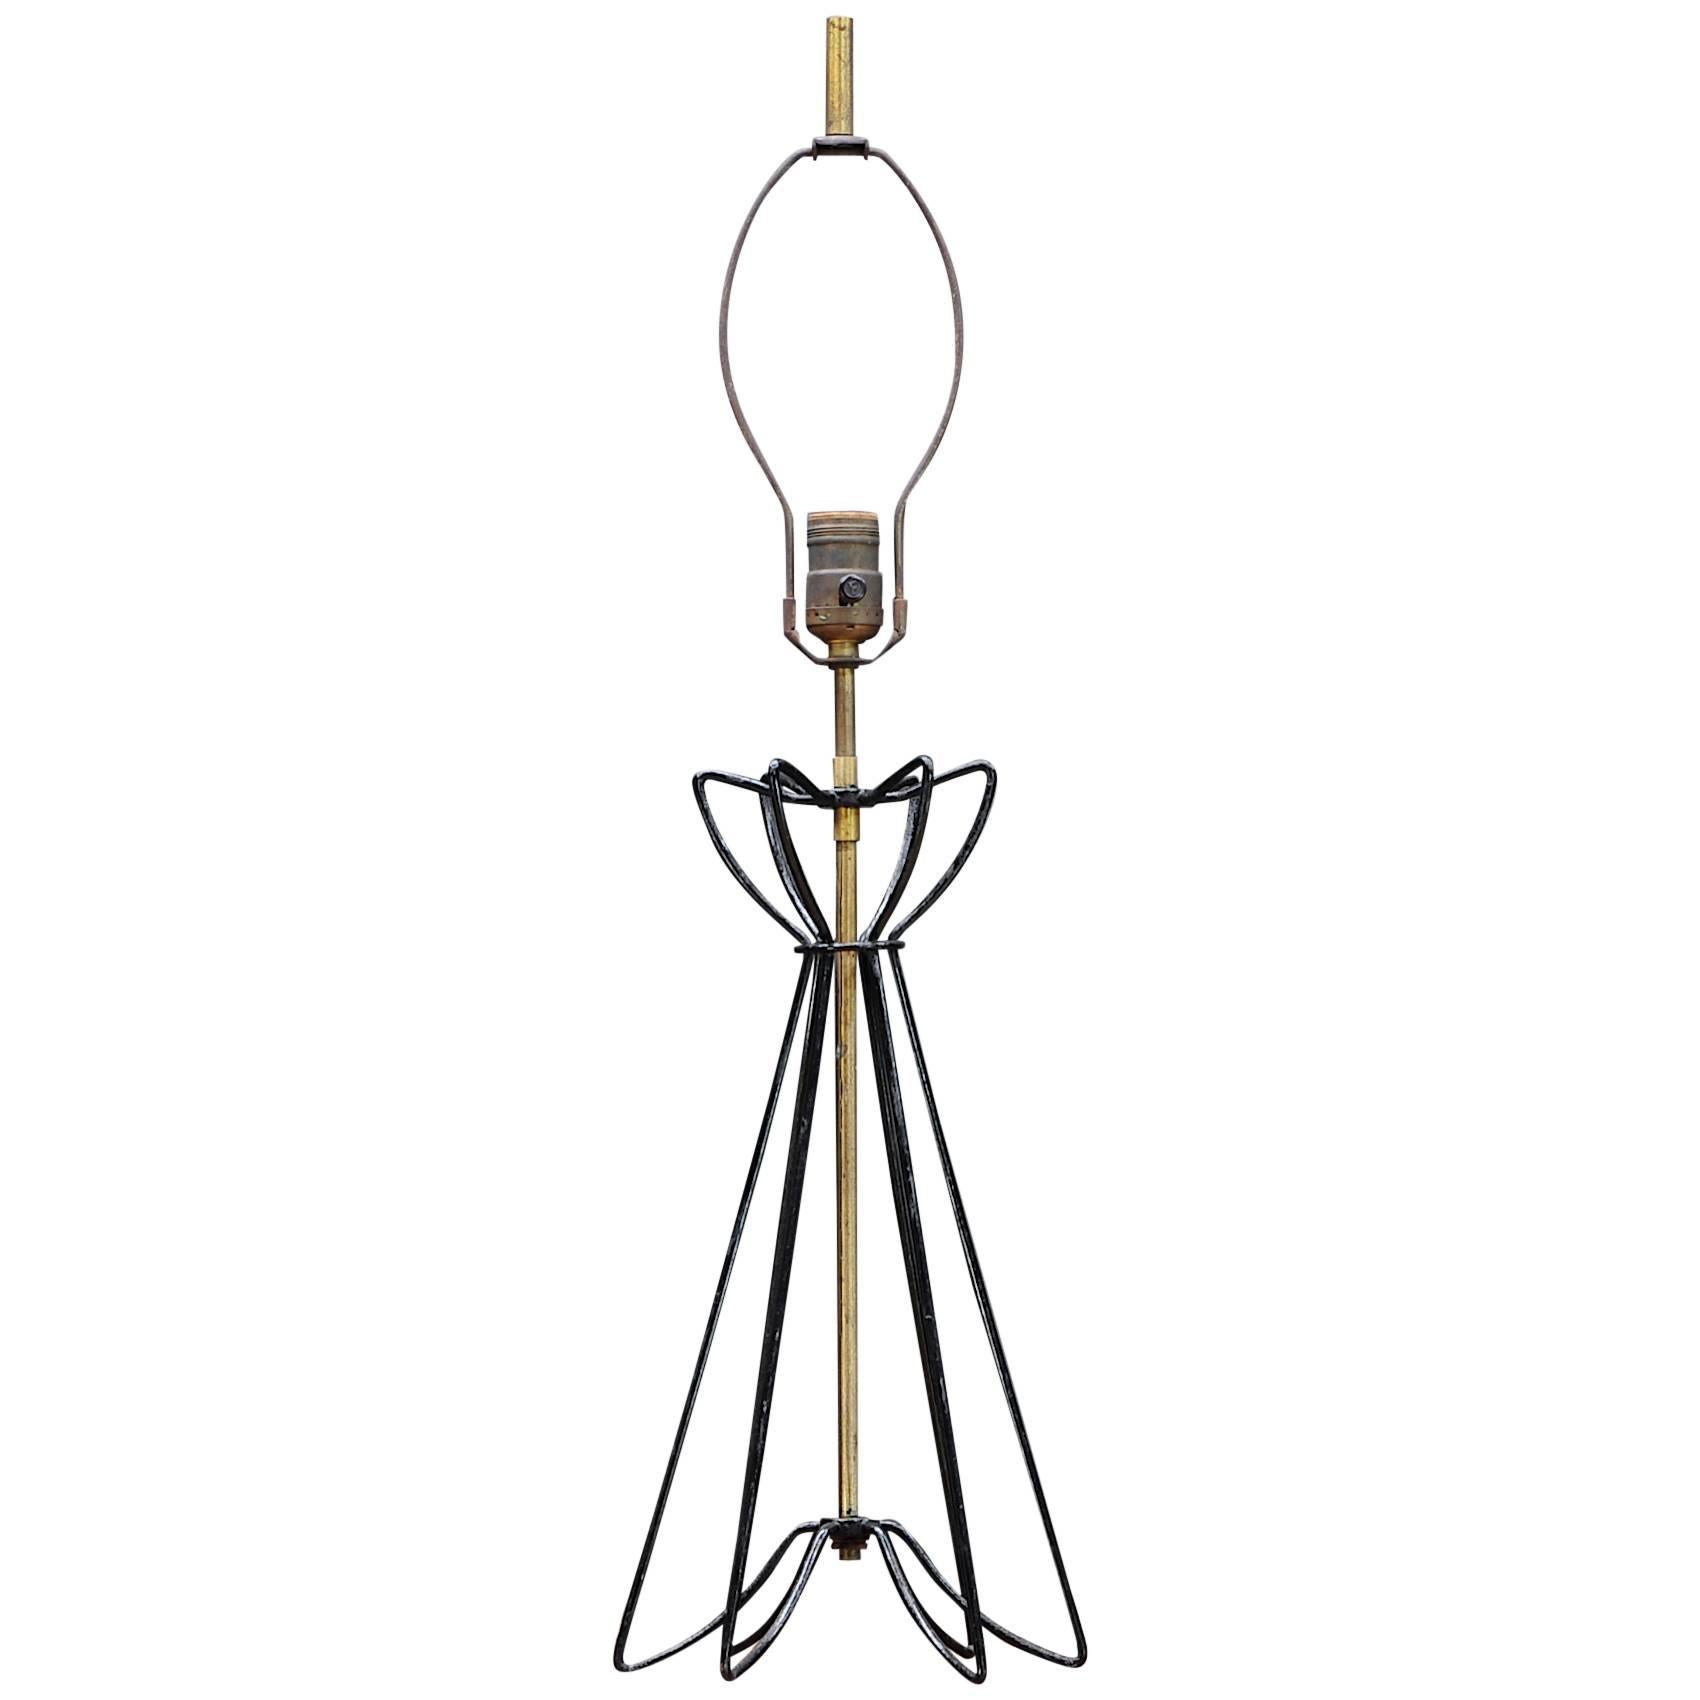 Ferris and Shacknove Modernist Bent Wire Table Lamp